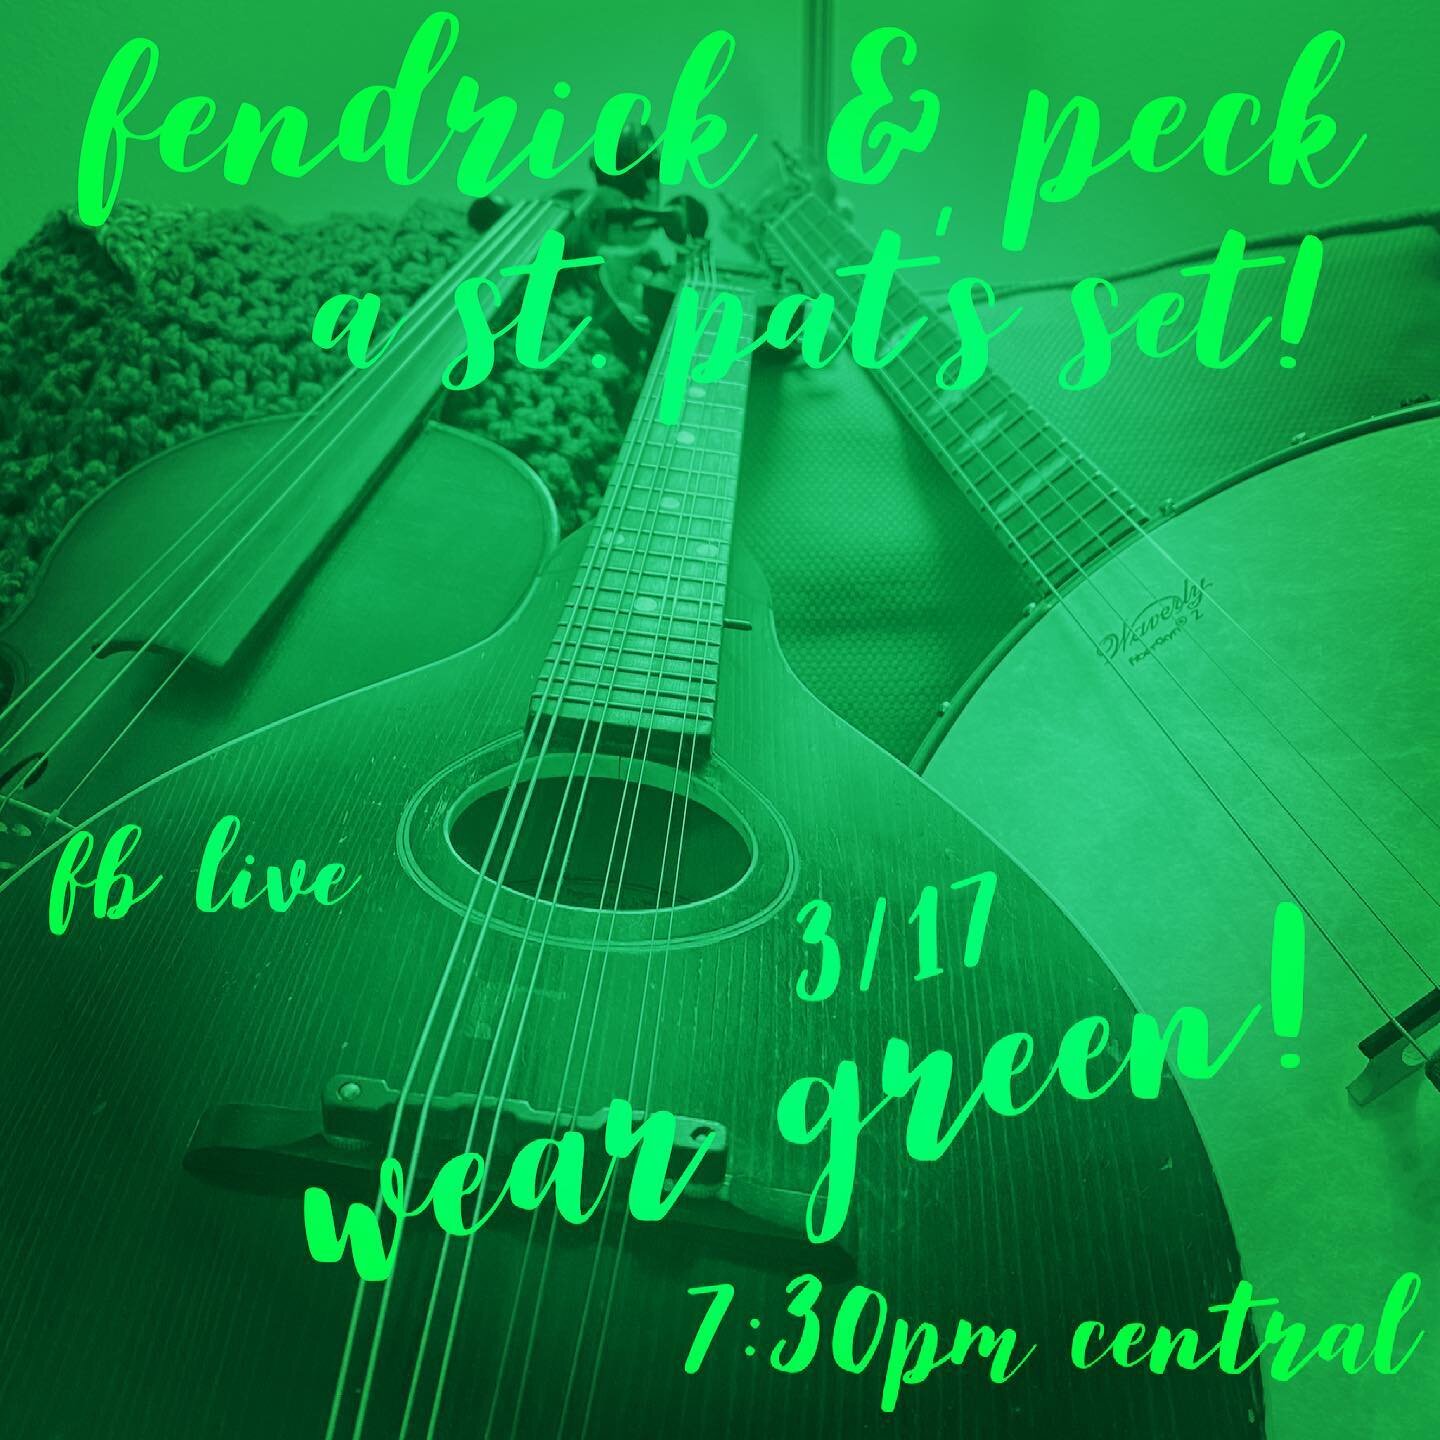 Lovin&rsquo; on some Irish songs this Wednesday night. Join us in the fun from the comfort of your living room! #dontforgettoweargreen🍀